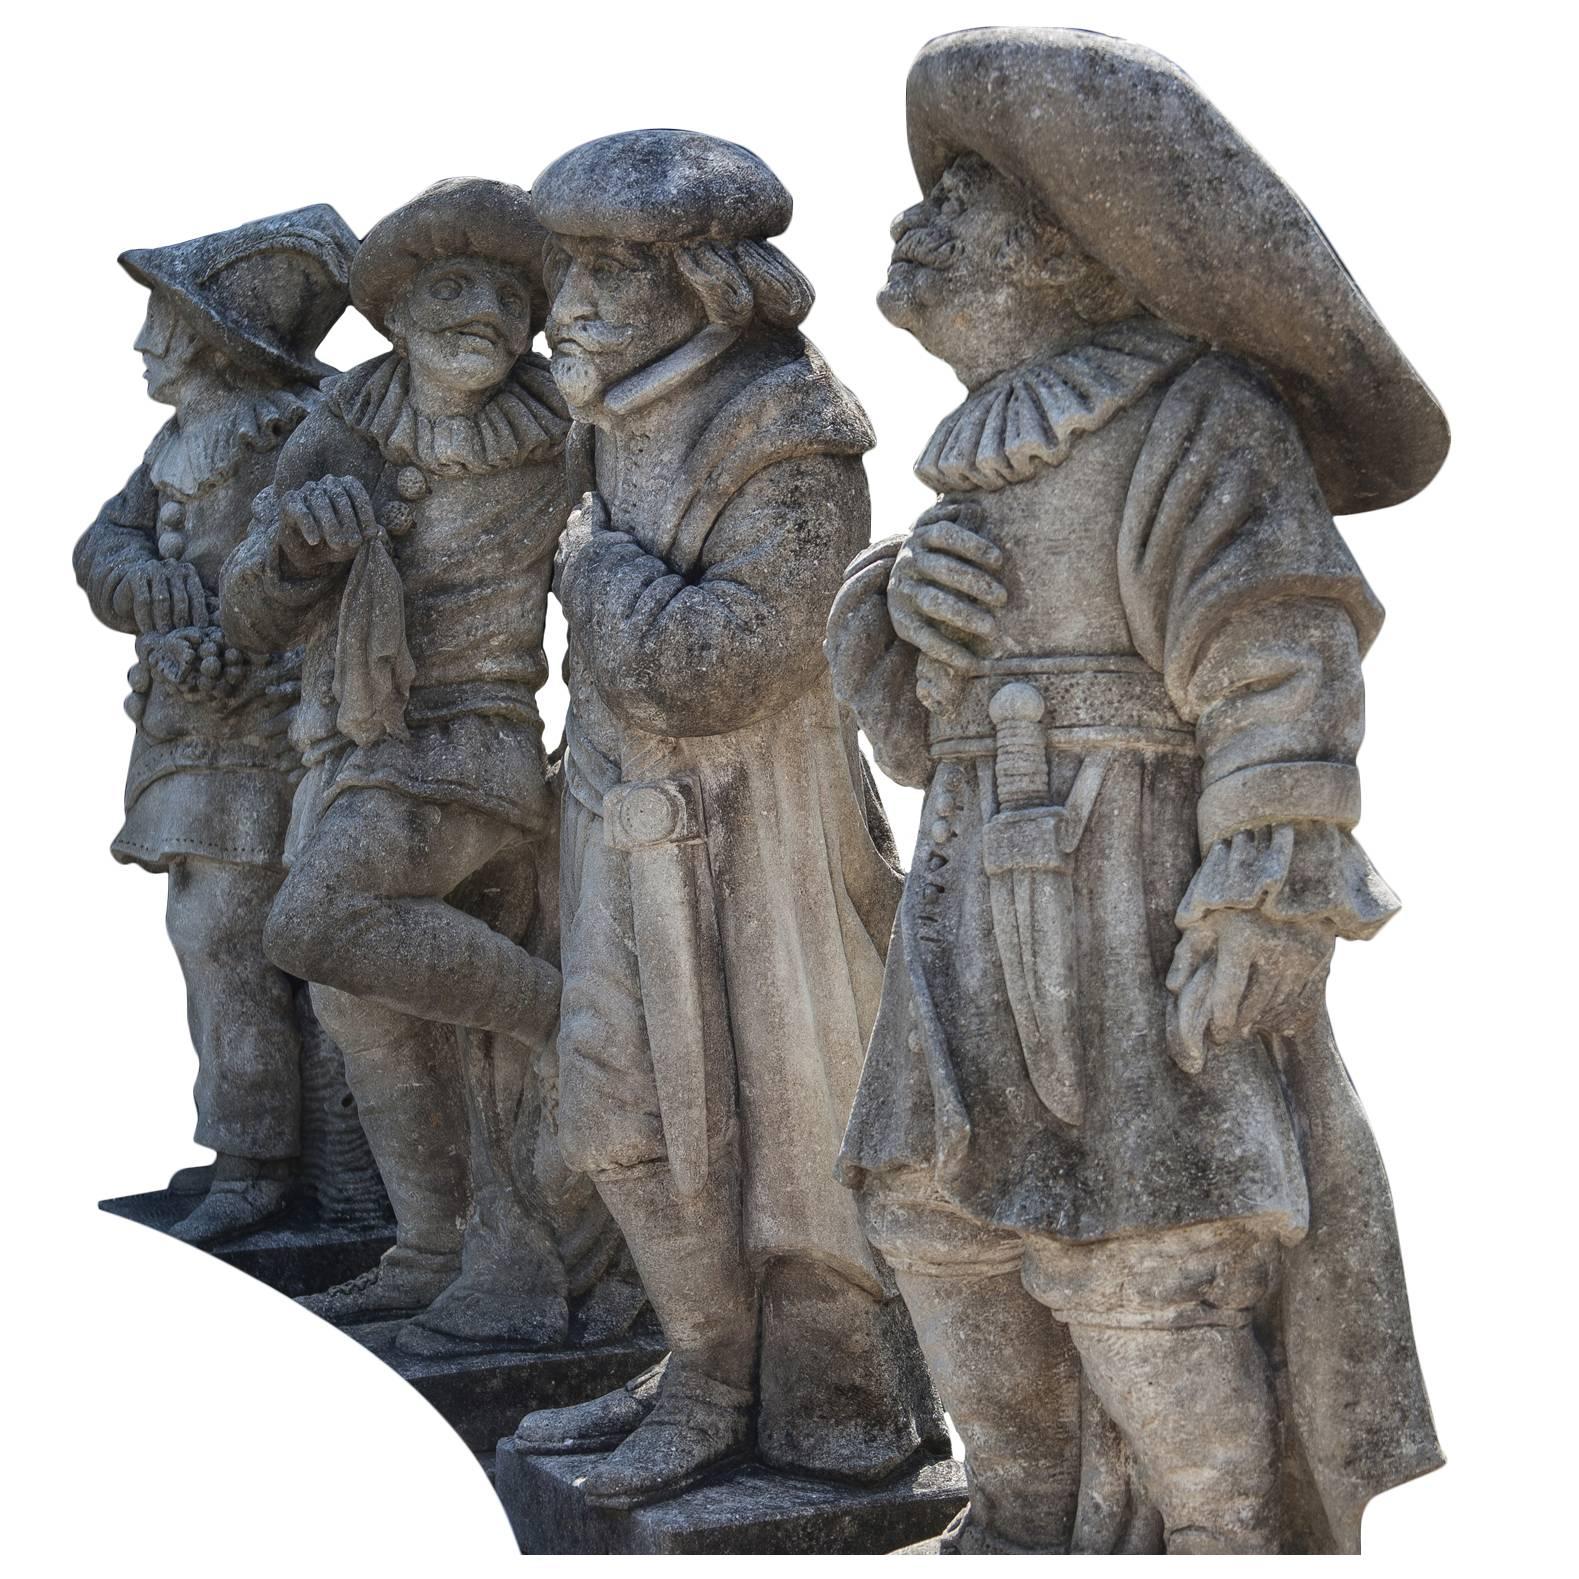 A set of four rare Harlequin statues in hand carved limestone with original pedestals. These kind of characters were comic servants and first appeared in the early 17th century in England. Wear consistent with age and use. Province Veneto, Northern